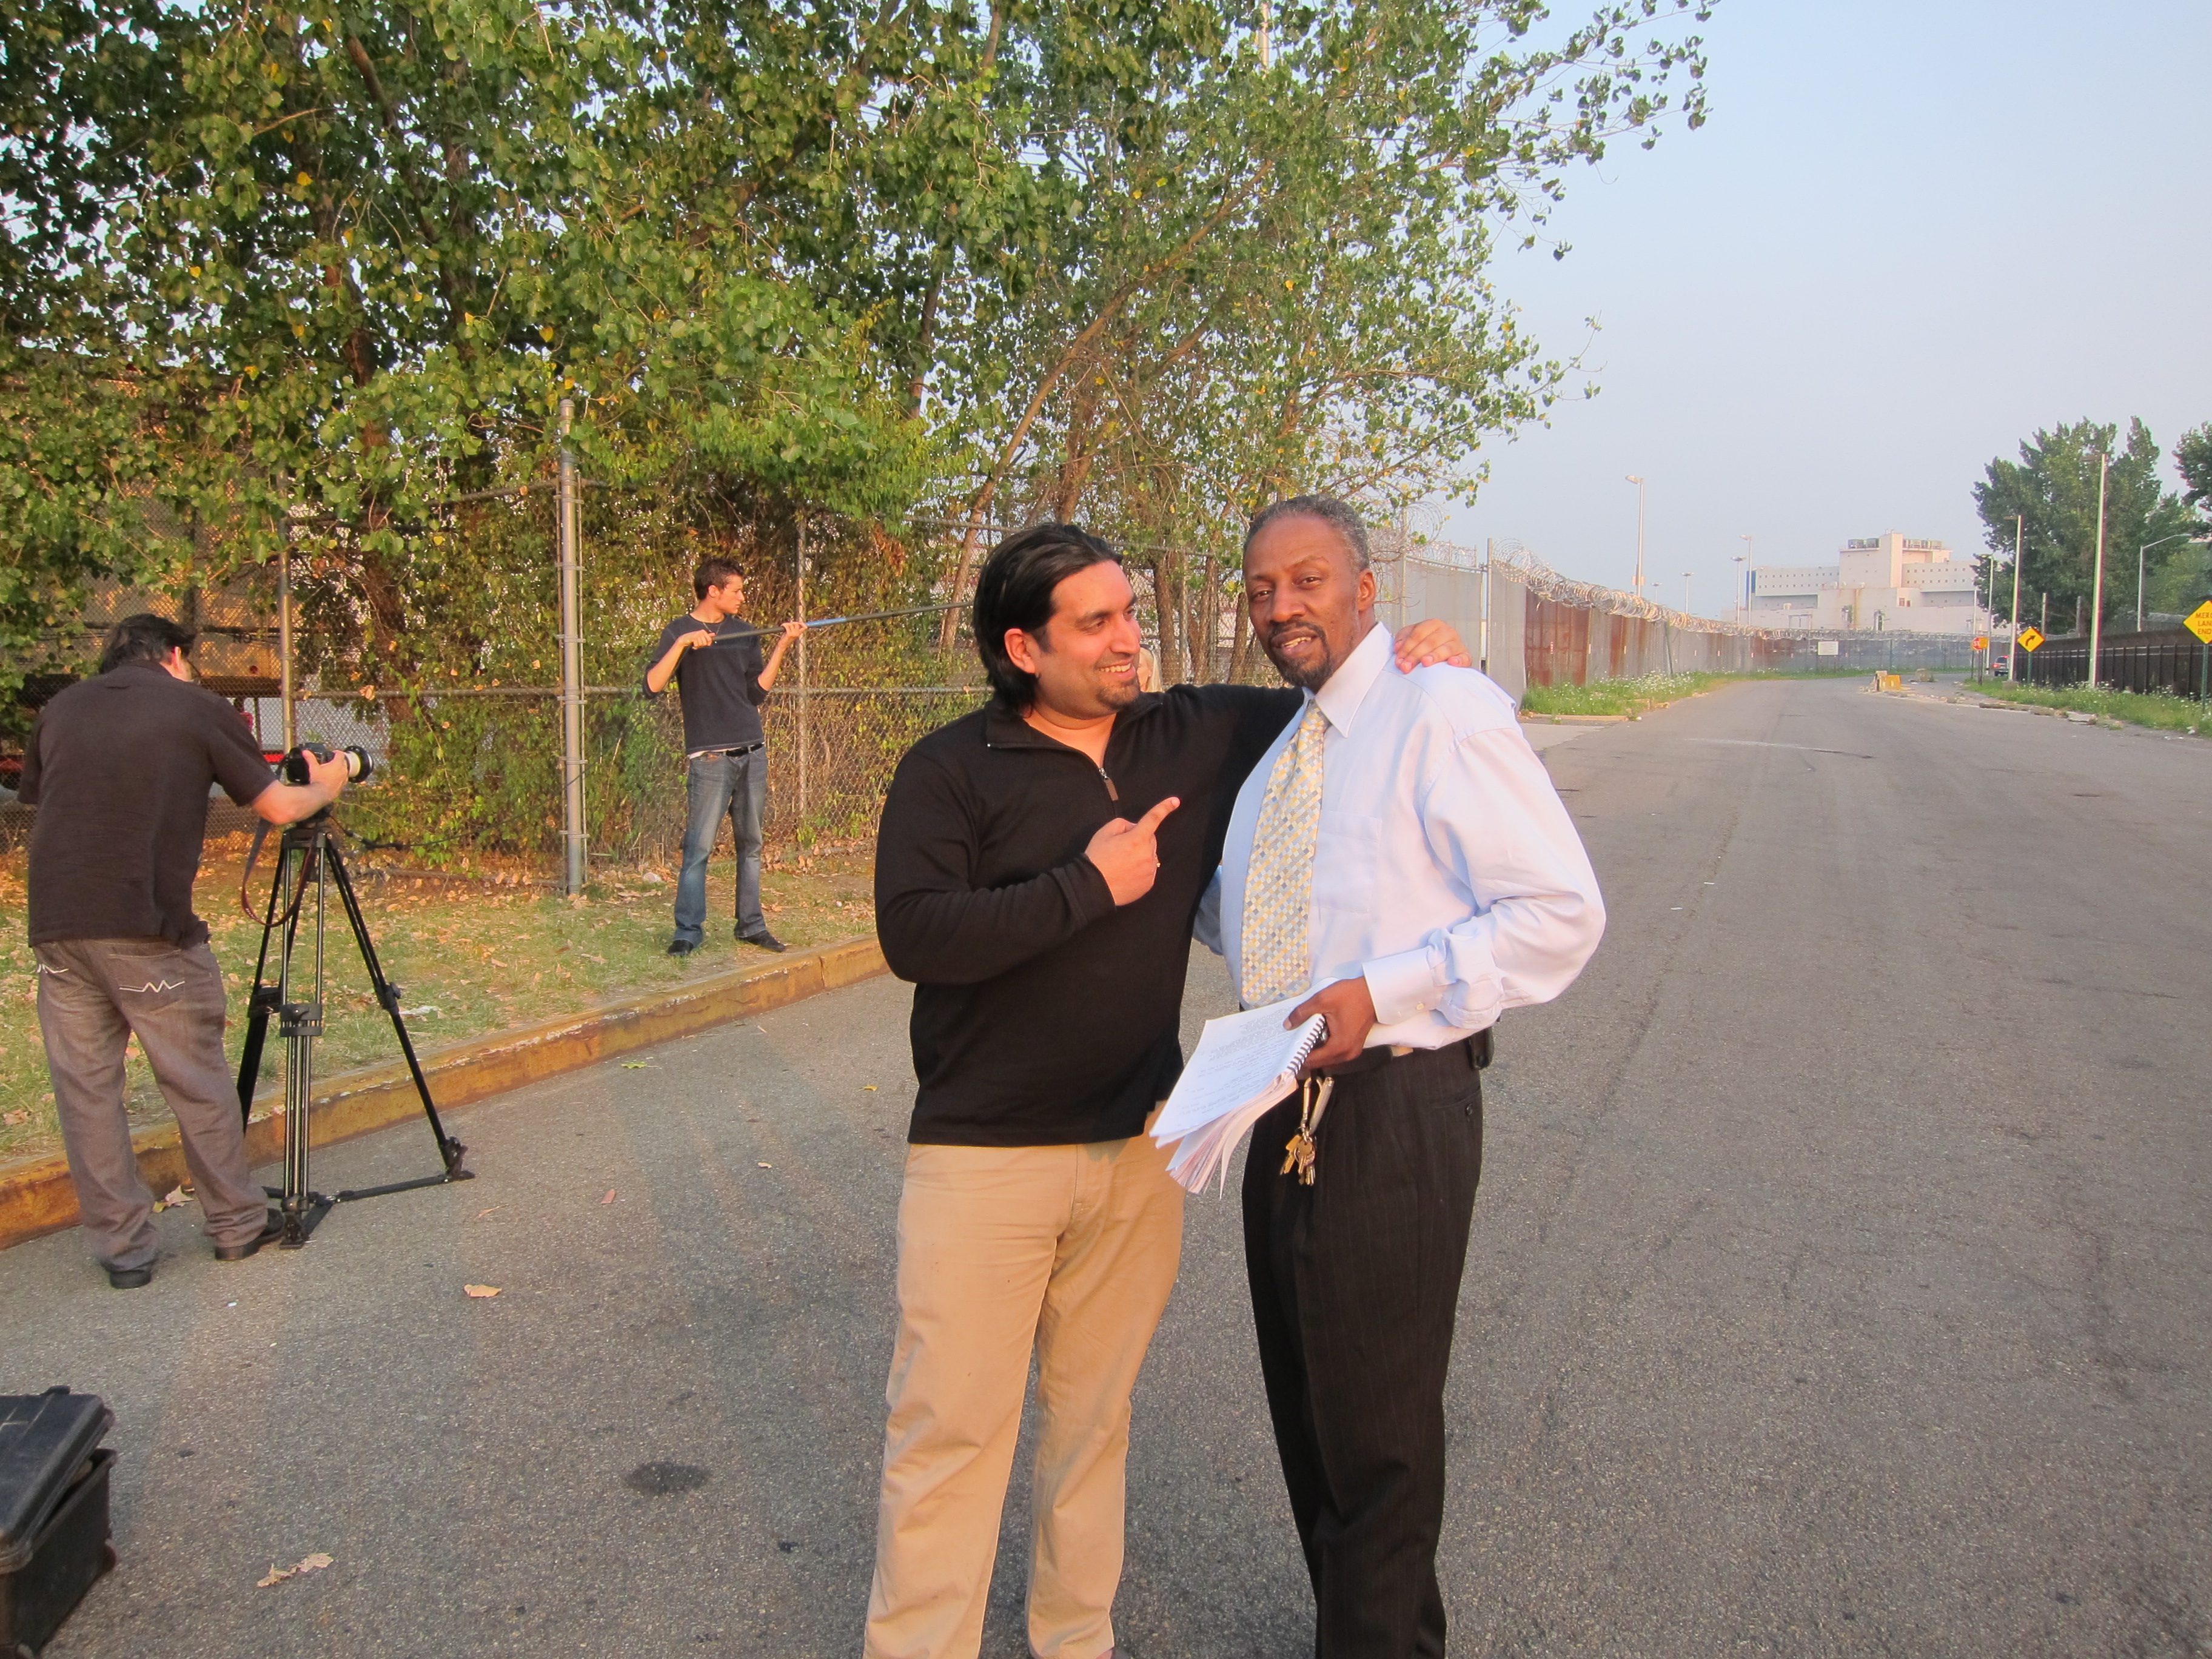 Gerald 'Prince' Miller and Ronnie Banerjee on location at Rikers Island Prison barge (set of Night Bird)